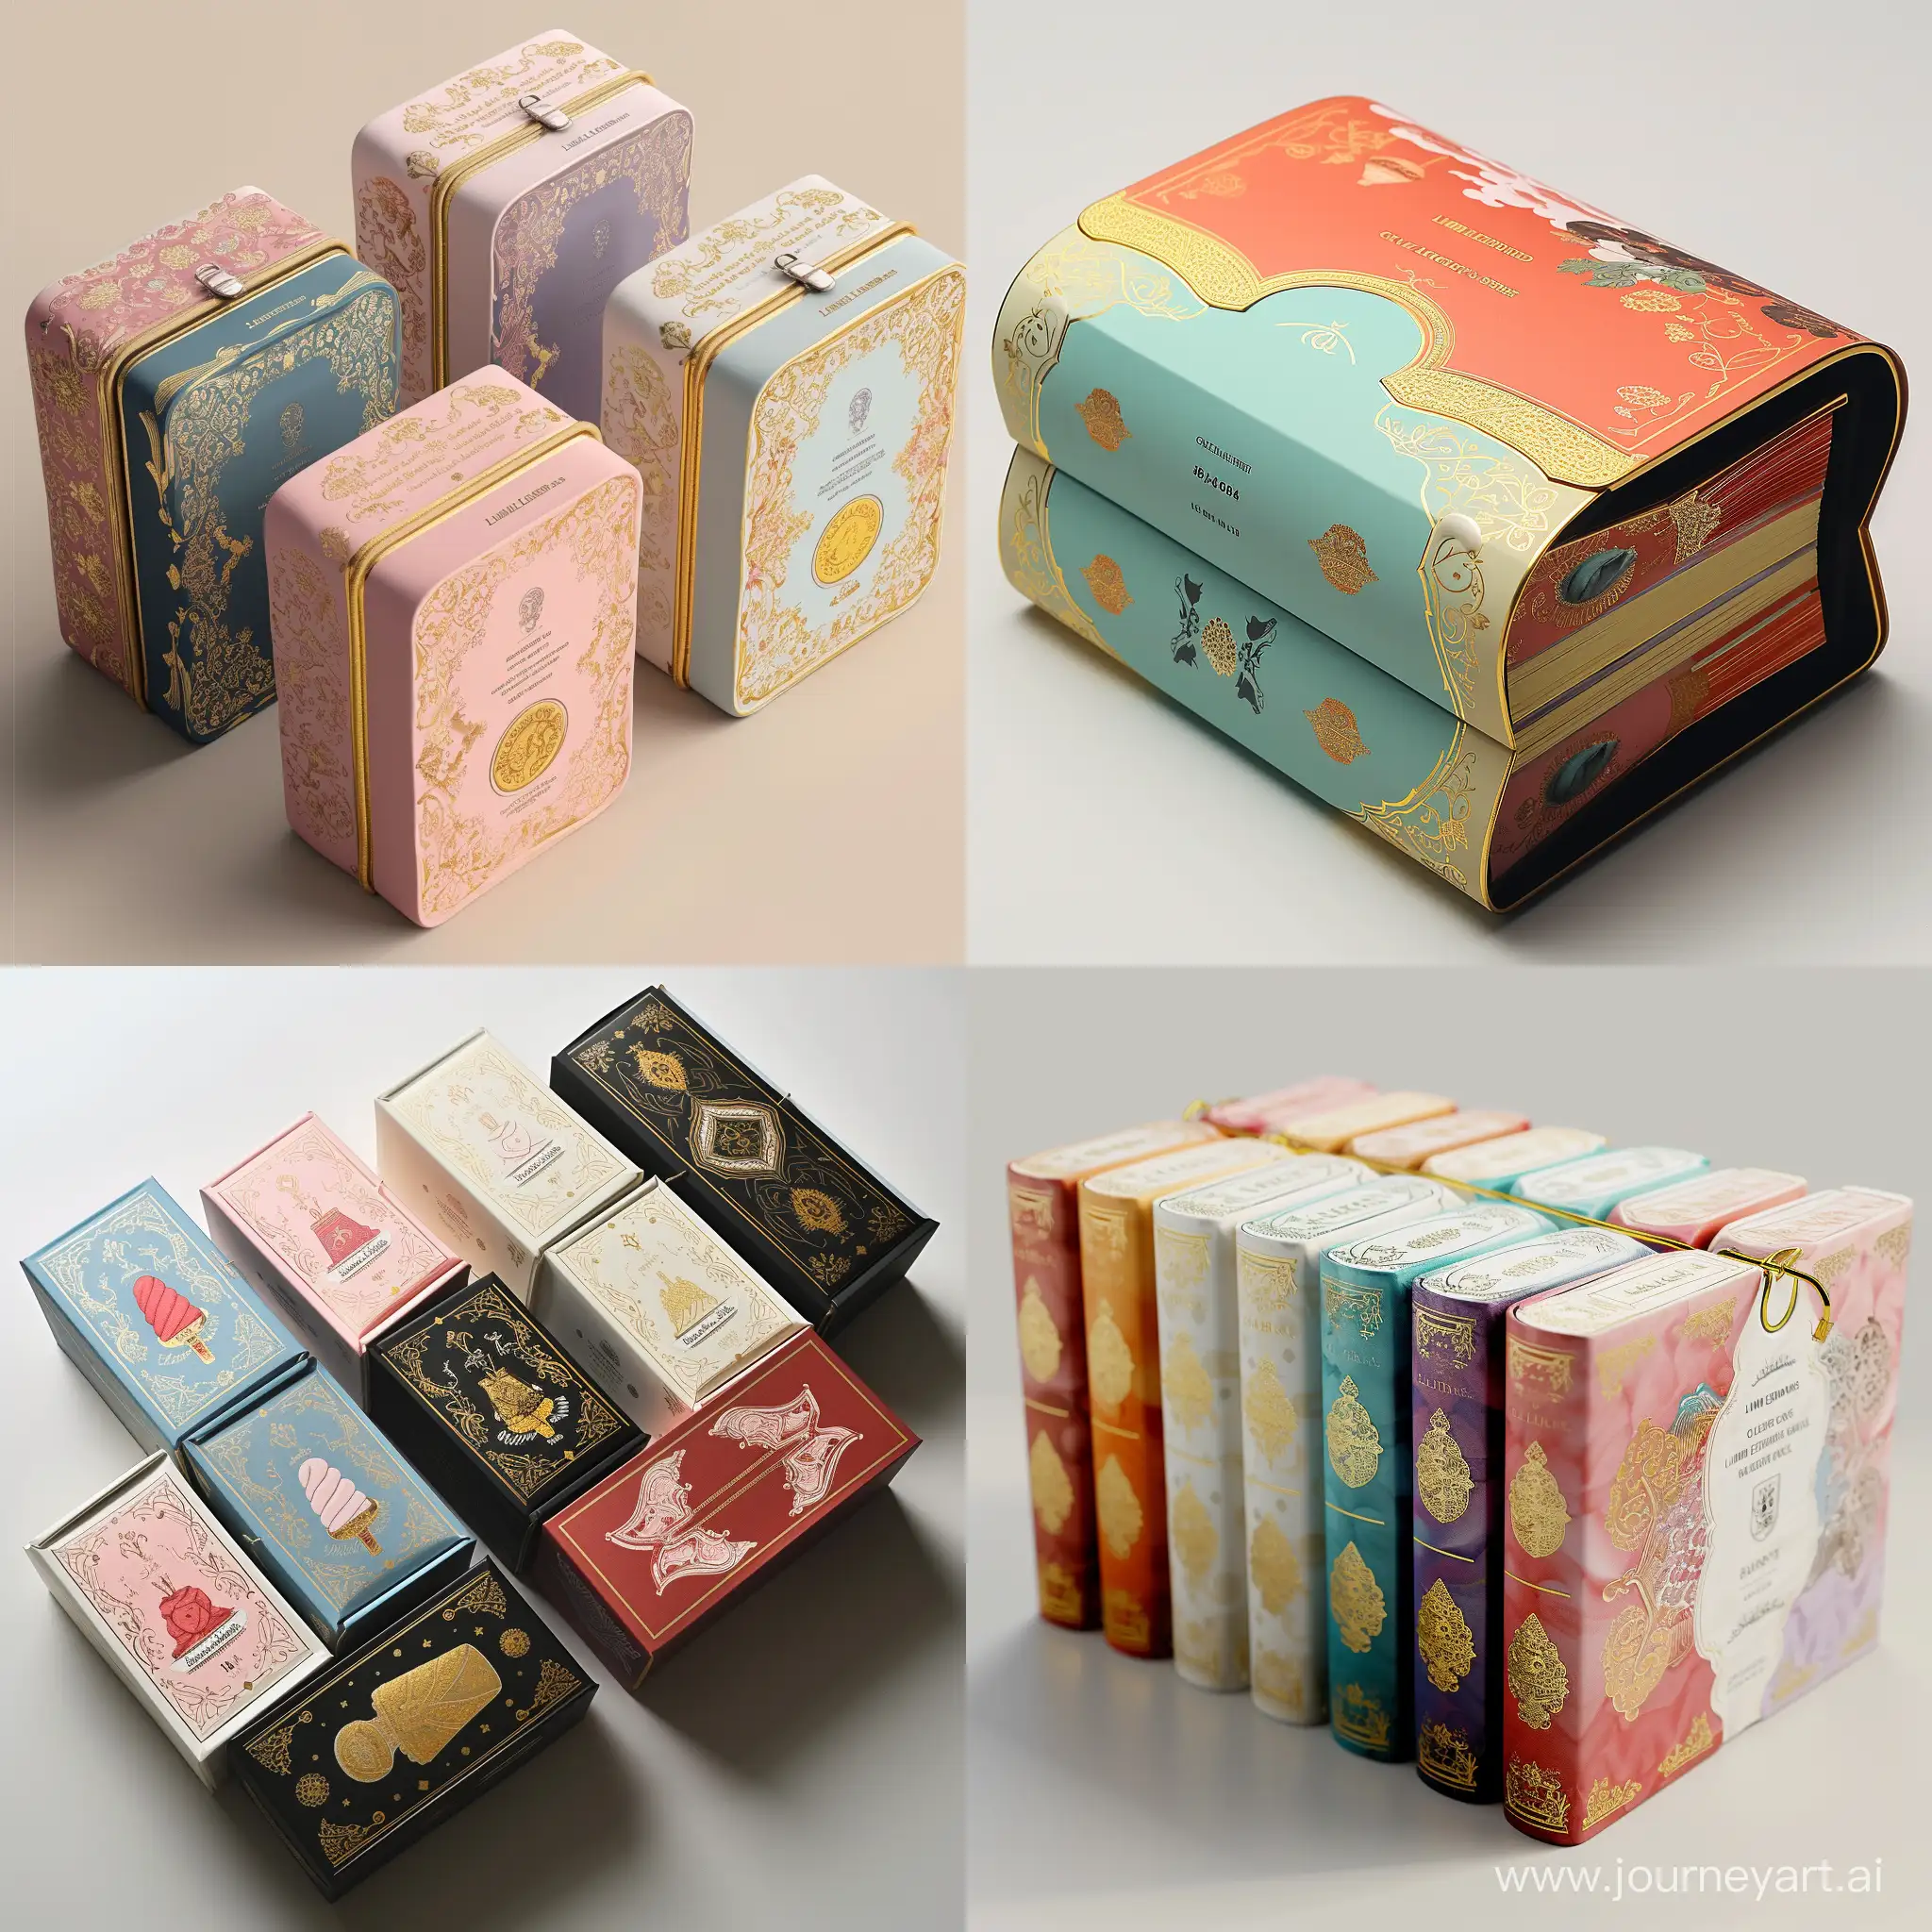 imagine an image of :Limited Edition Collector's Series "Design a book-shaped ice cream box with a magnetic closure, dimensions 18cm x 12cm x 4cm. The artwork and themes, varying with editions, should reflect Persian culture. Use varying colors for each edition with gold foil stamping on the 'spine' and 'cover'. The material should be sturdy cardboard with a fine paper finish. Each edition should come with a numbered certificate of authenticity."realistic packaging design